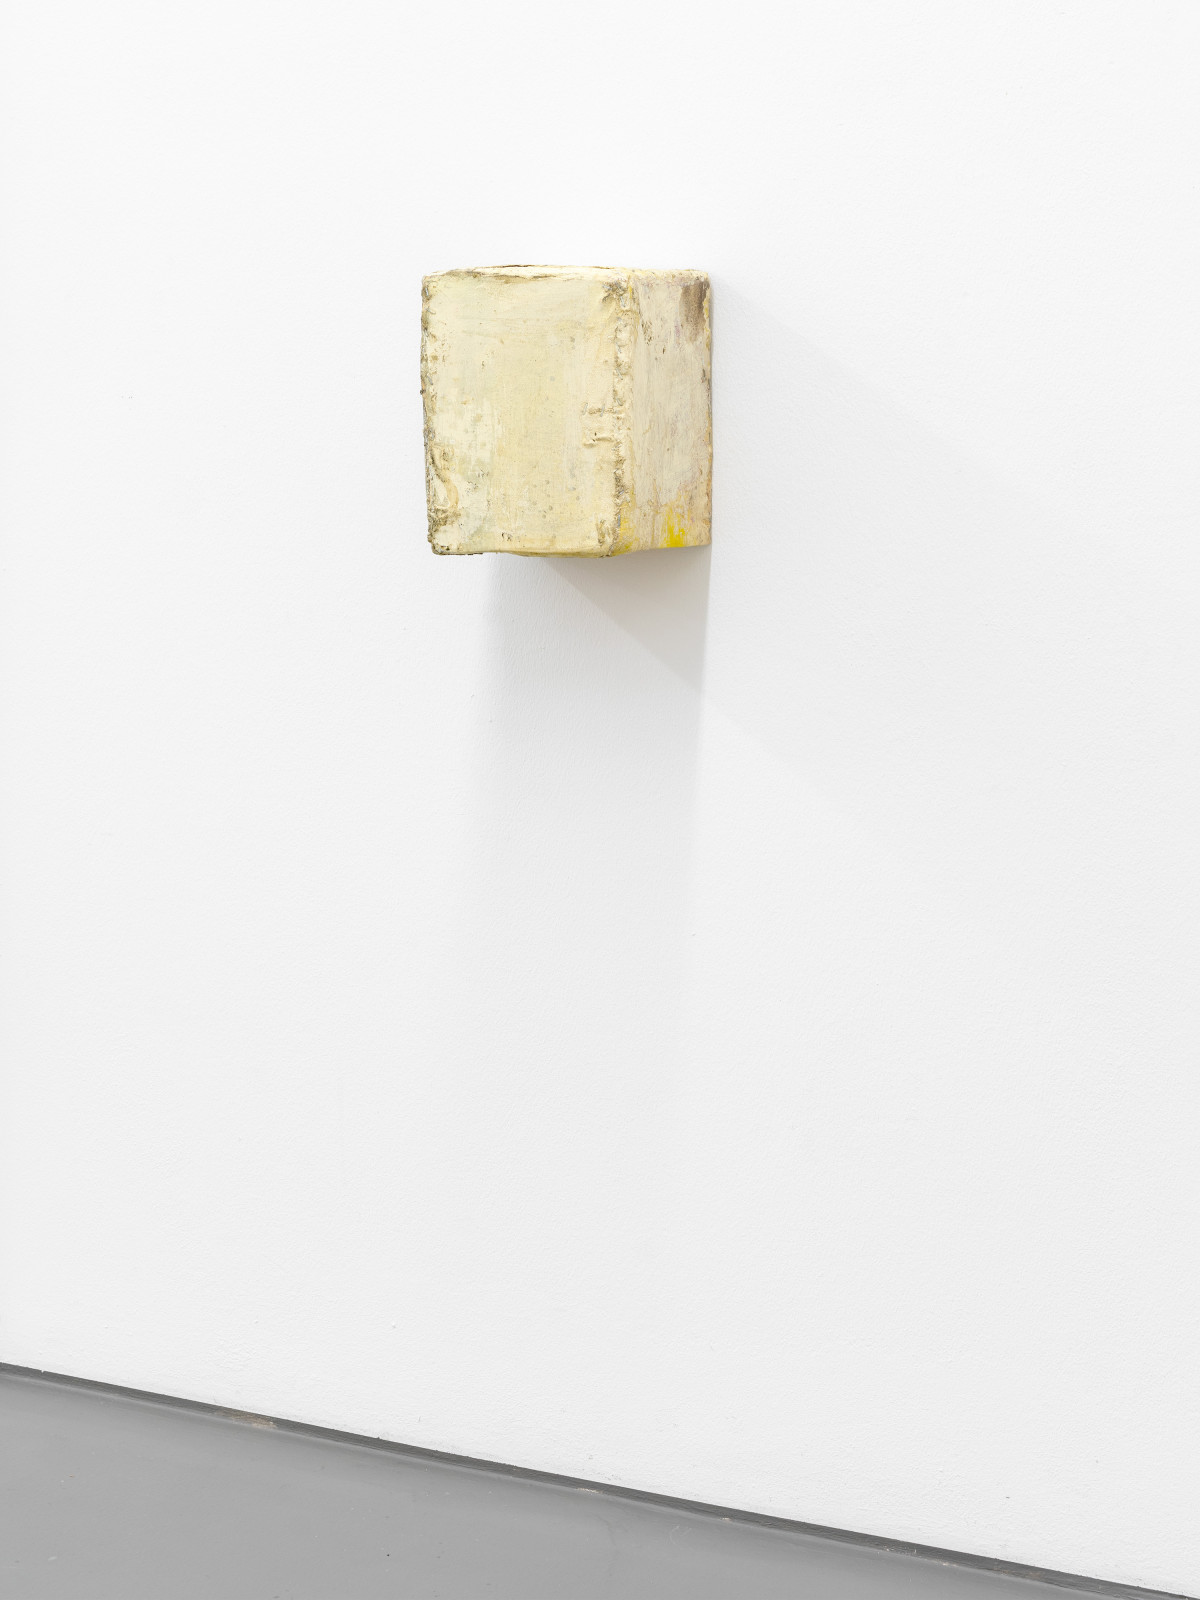 Lawrence Carroll, ‘Untitled (box painting)’, 2008-2019, Oil, house-paint, pencil, wax on canvas on wood